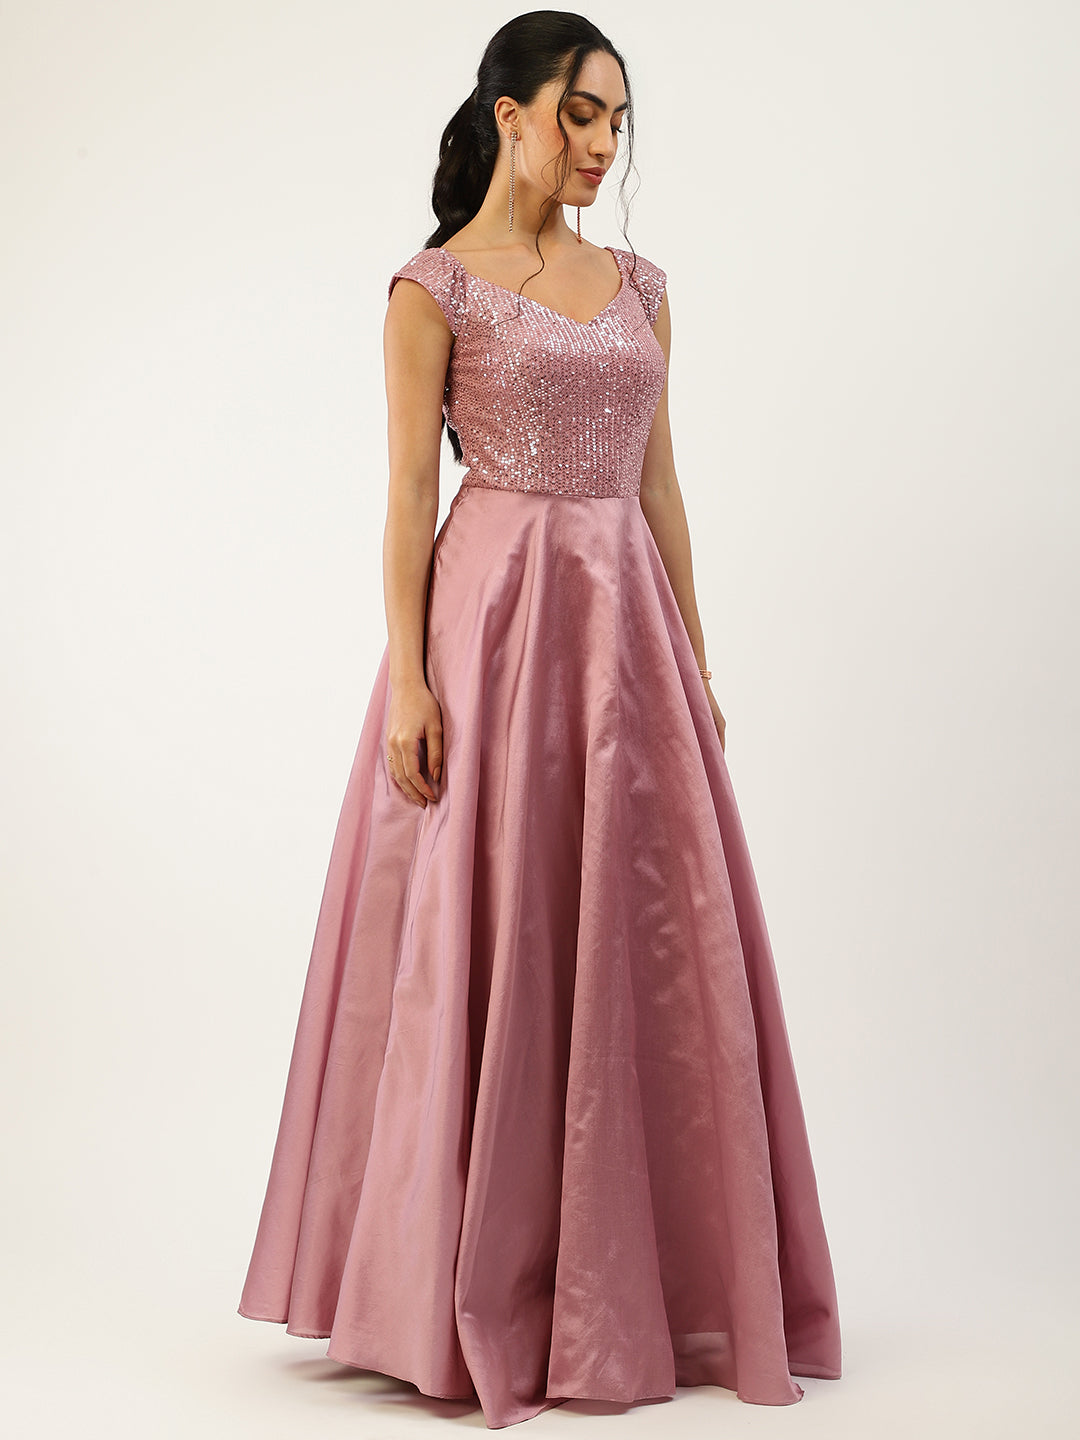 Sparkle and Save: Exquisite Ball Gowns at 20% off!